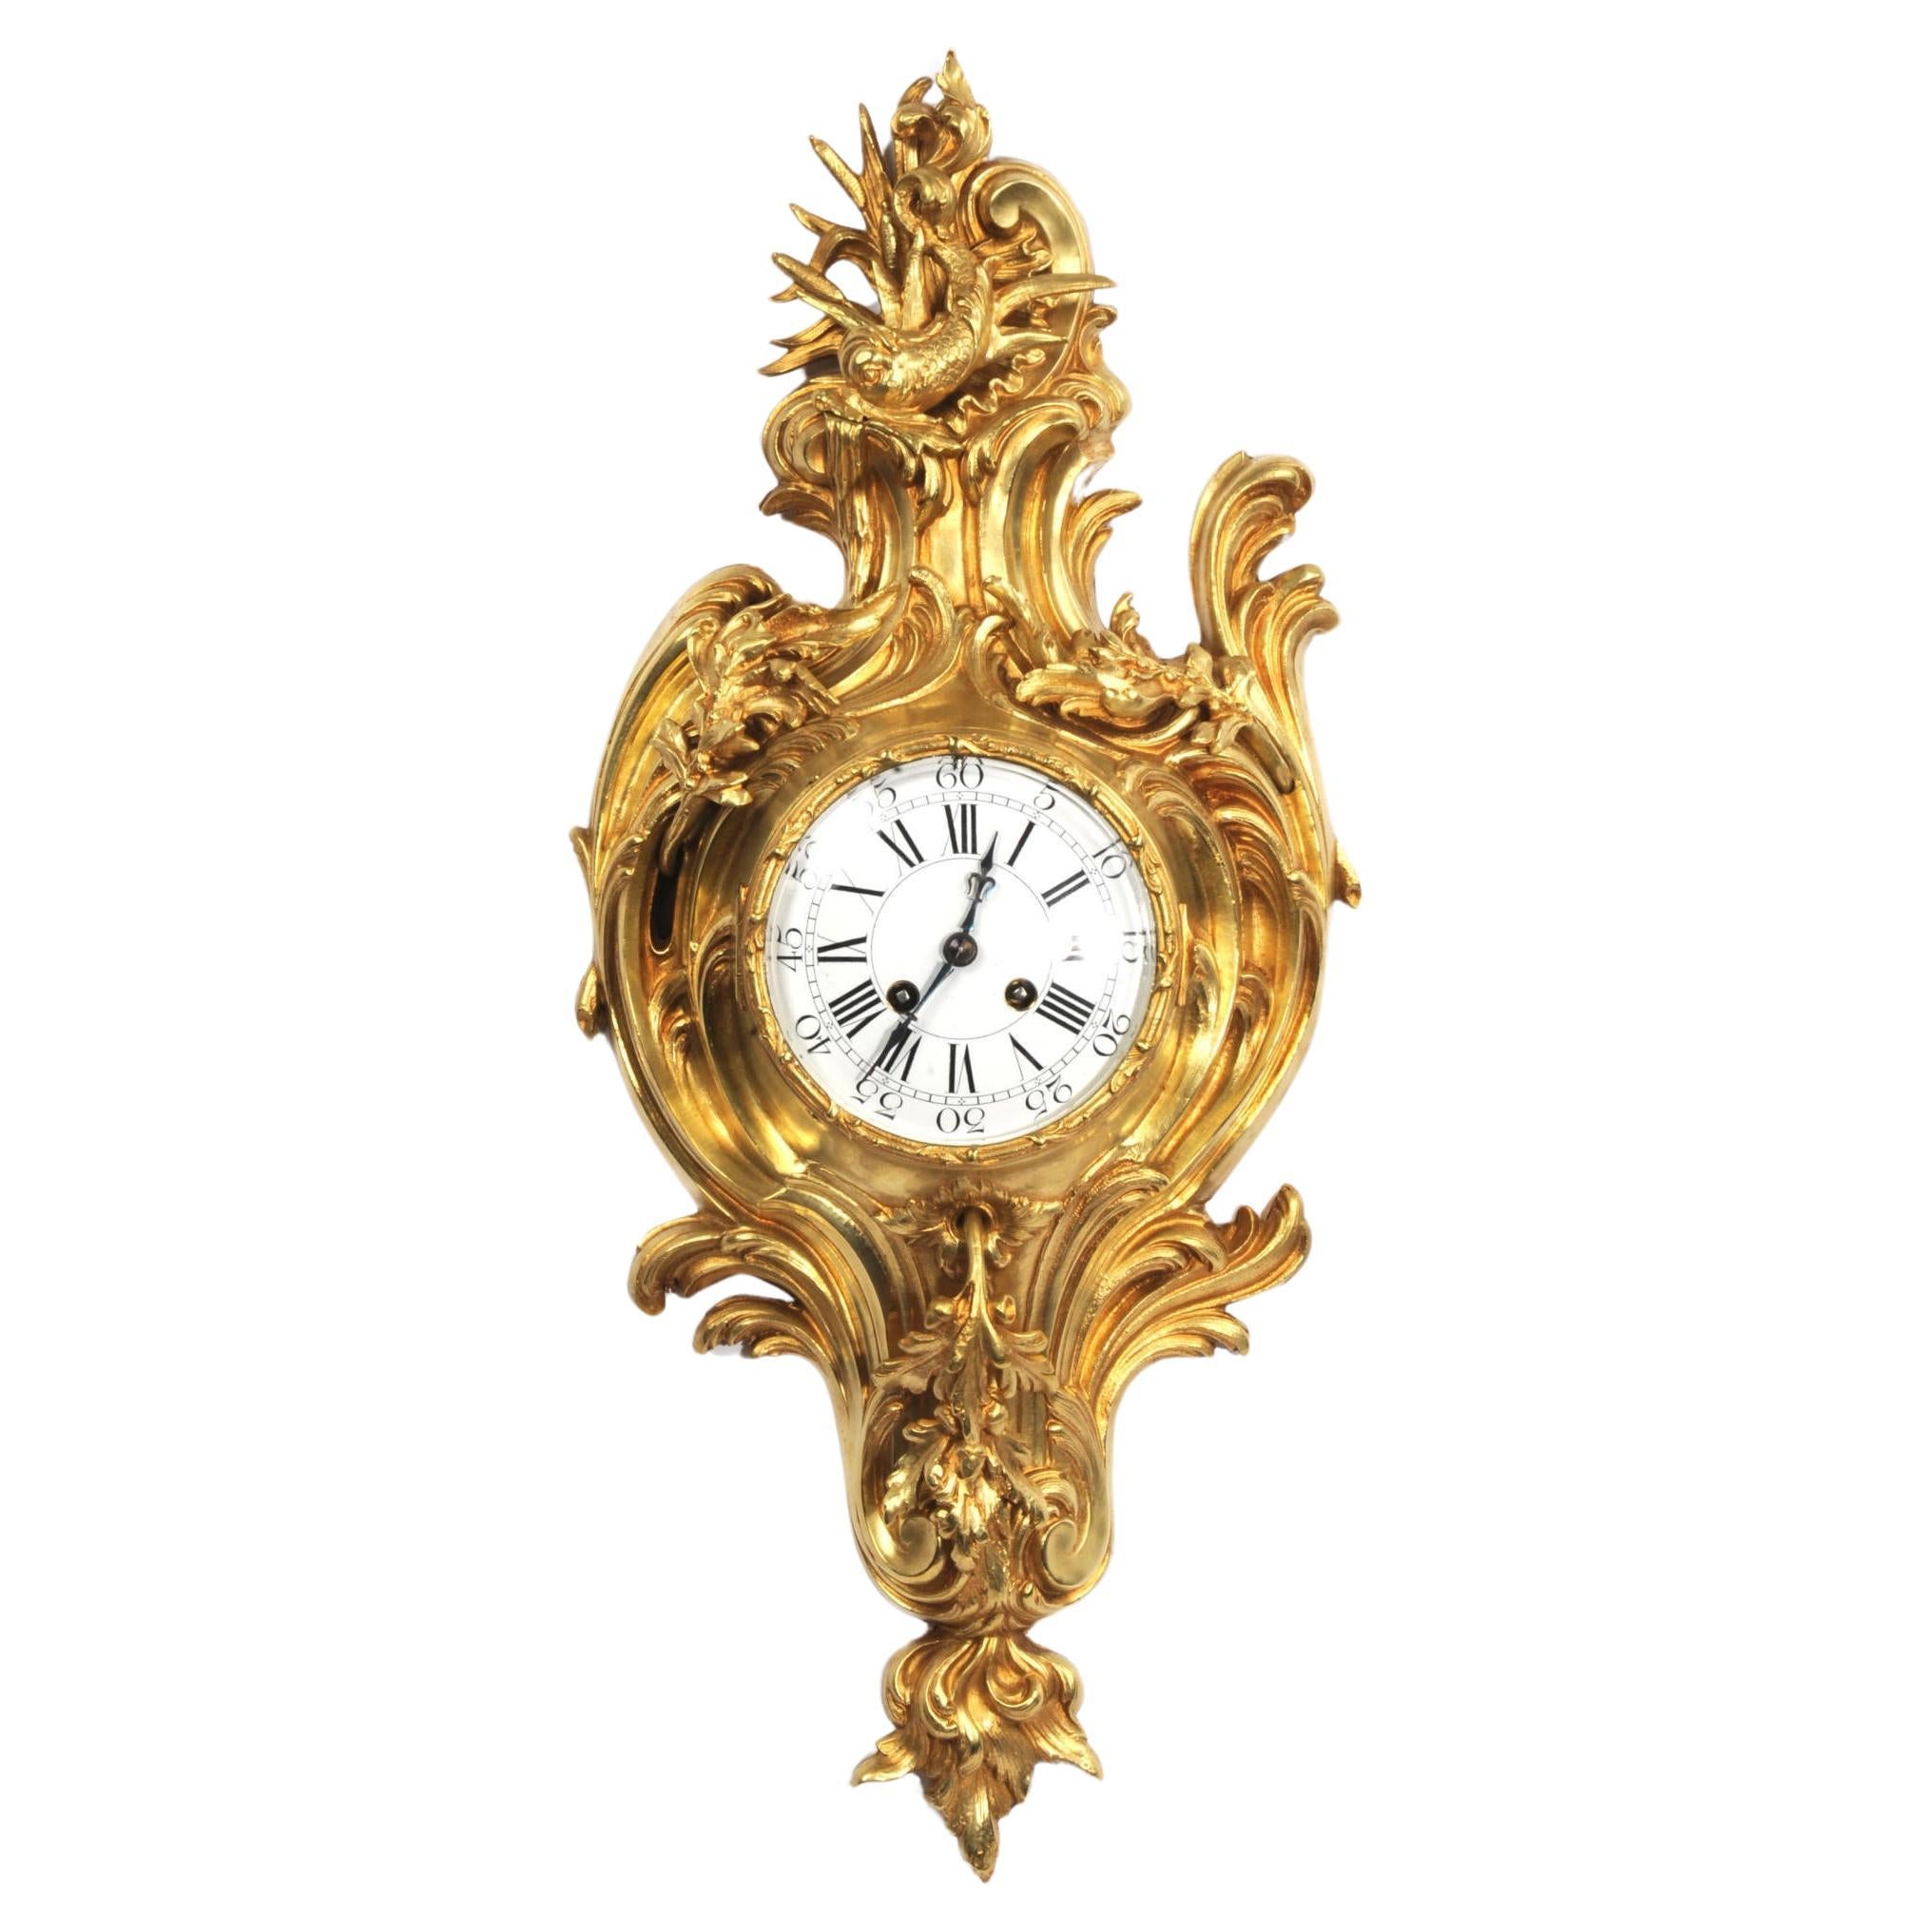 Antique French Ormolu Rococo Cartel Wall Clock - Dolphin For Sale